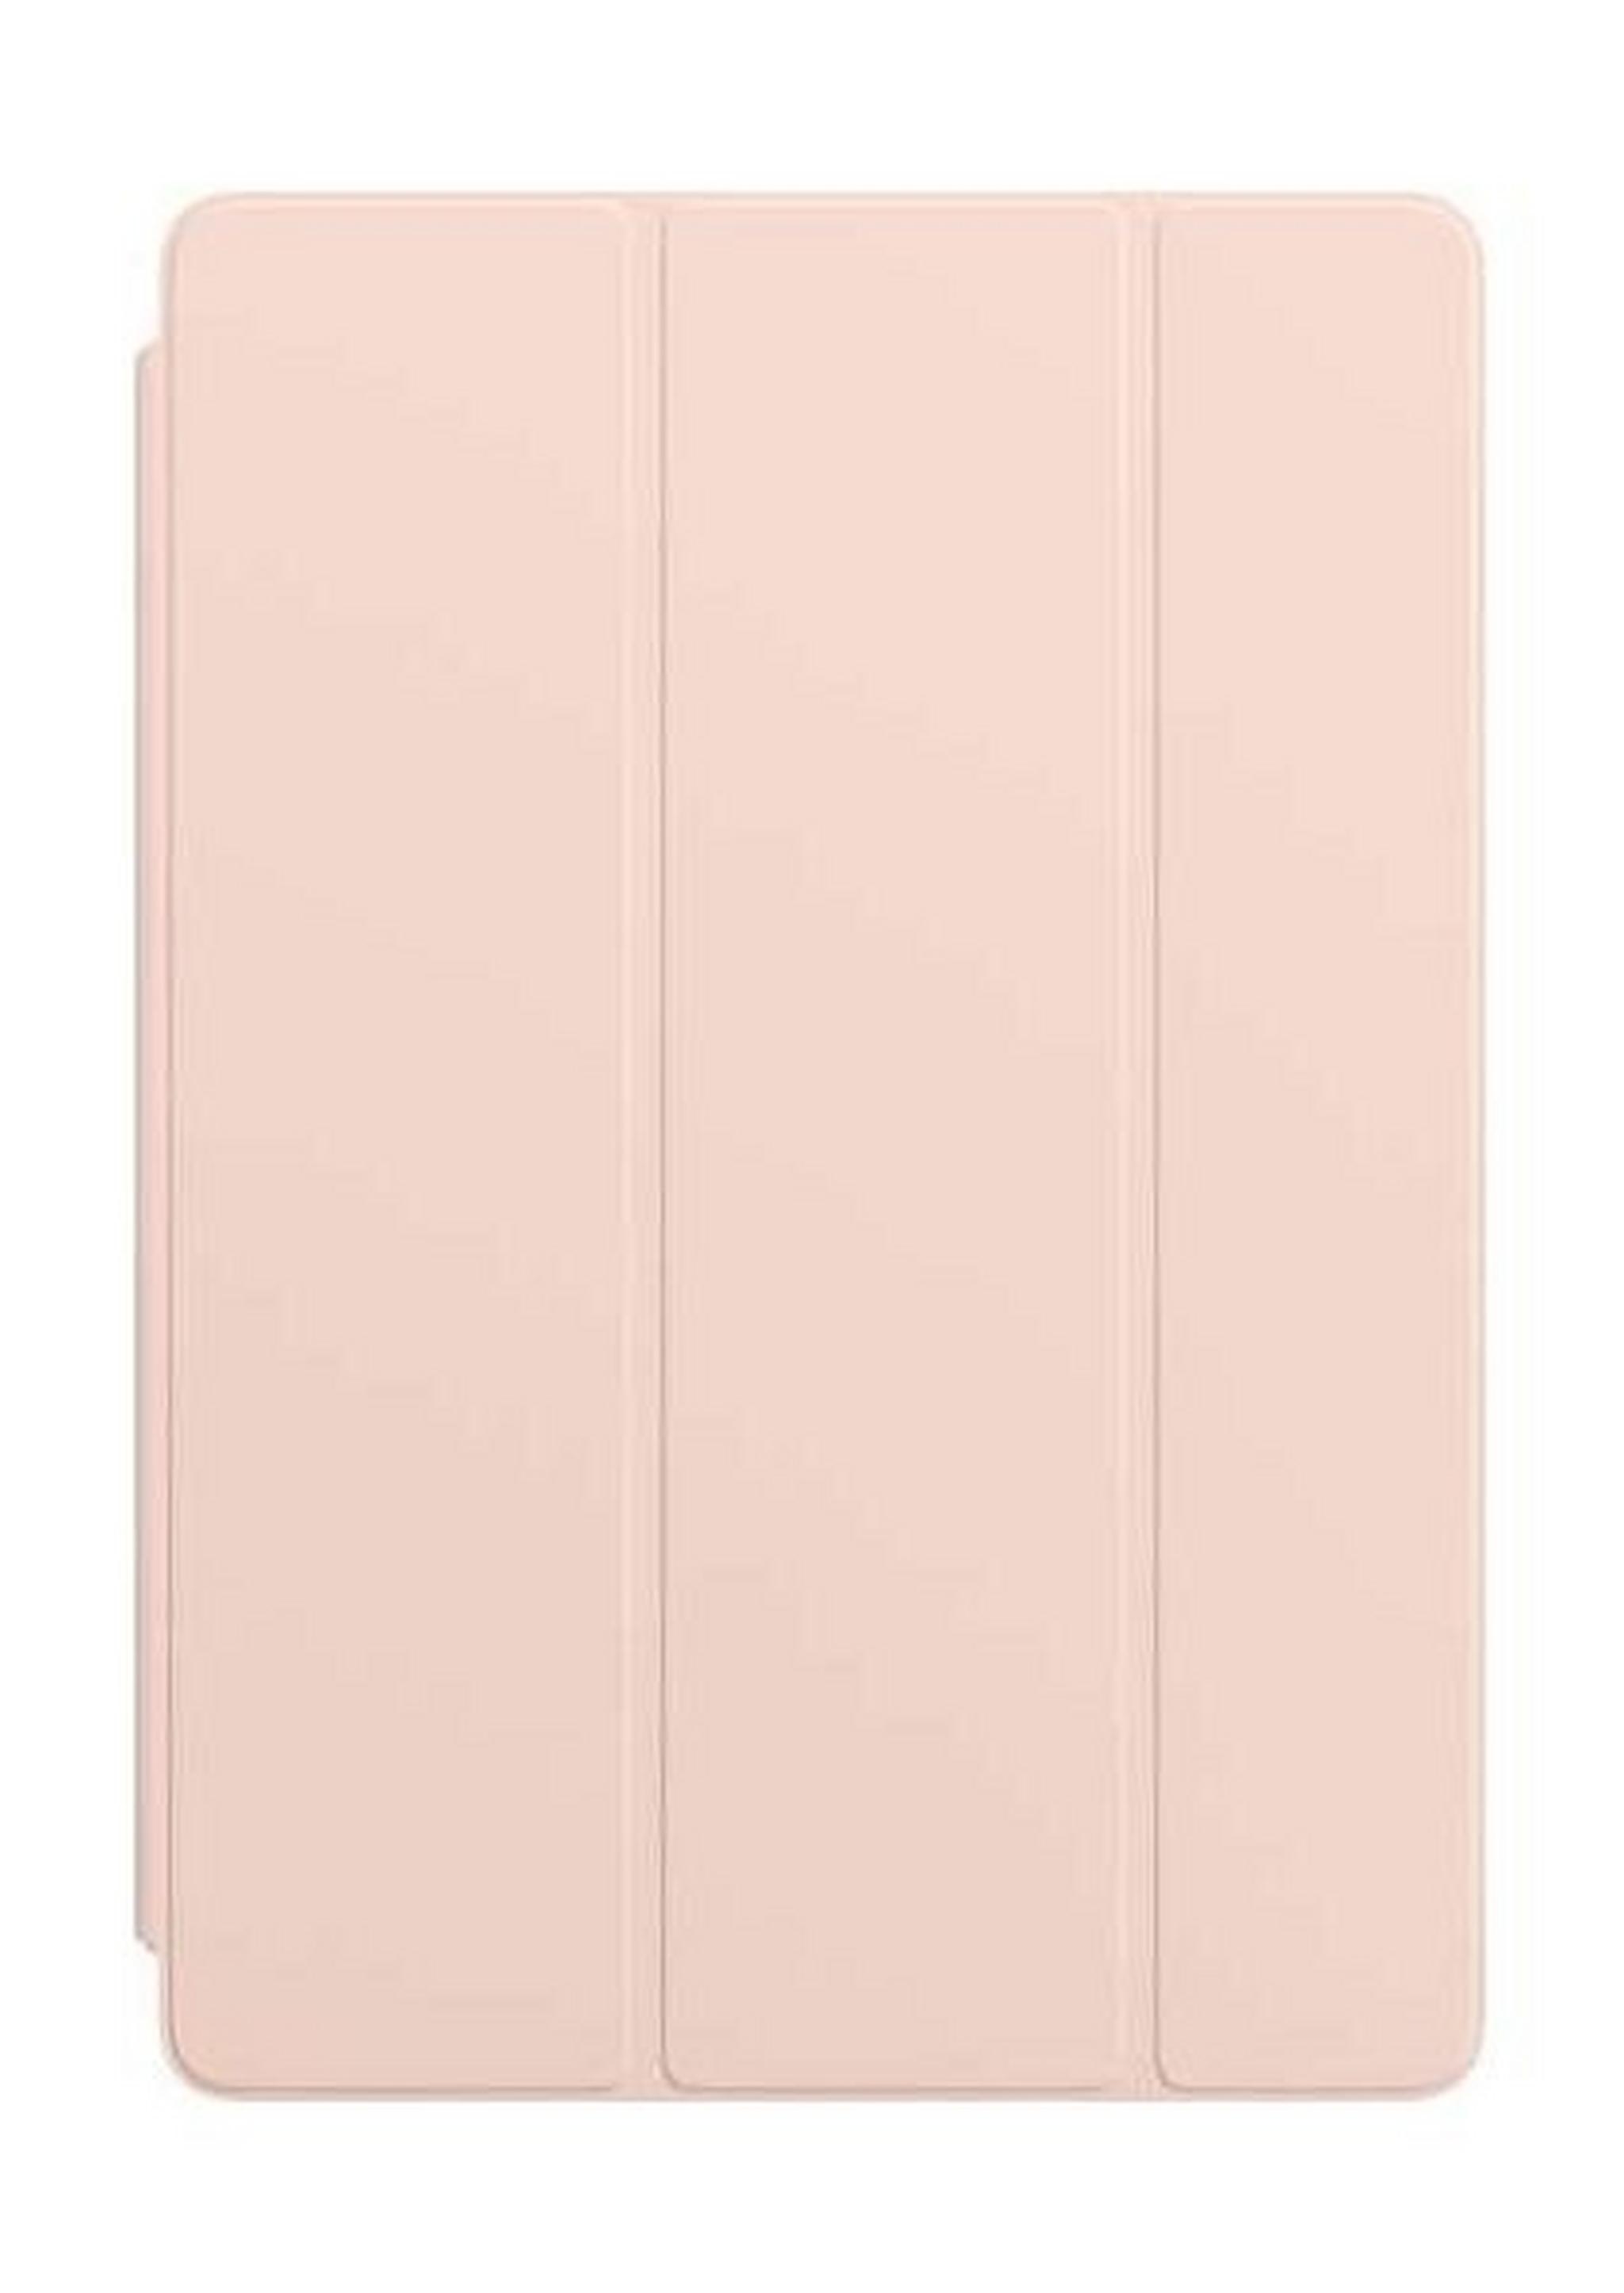 Apple Smart Cover for 10.5-inch iPad Air - Pink